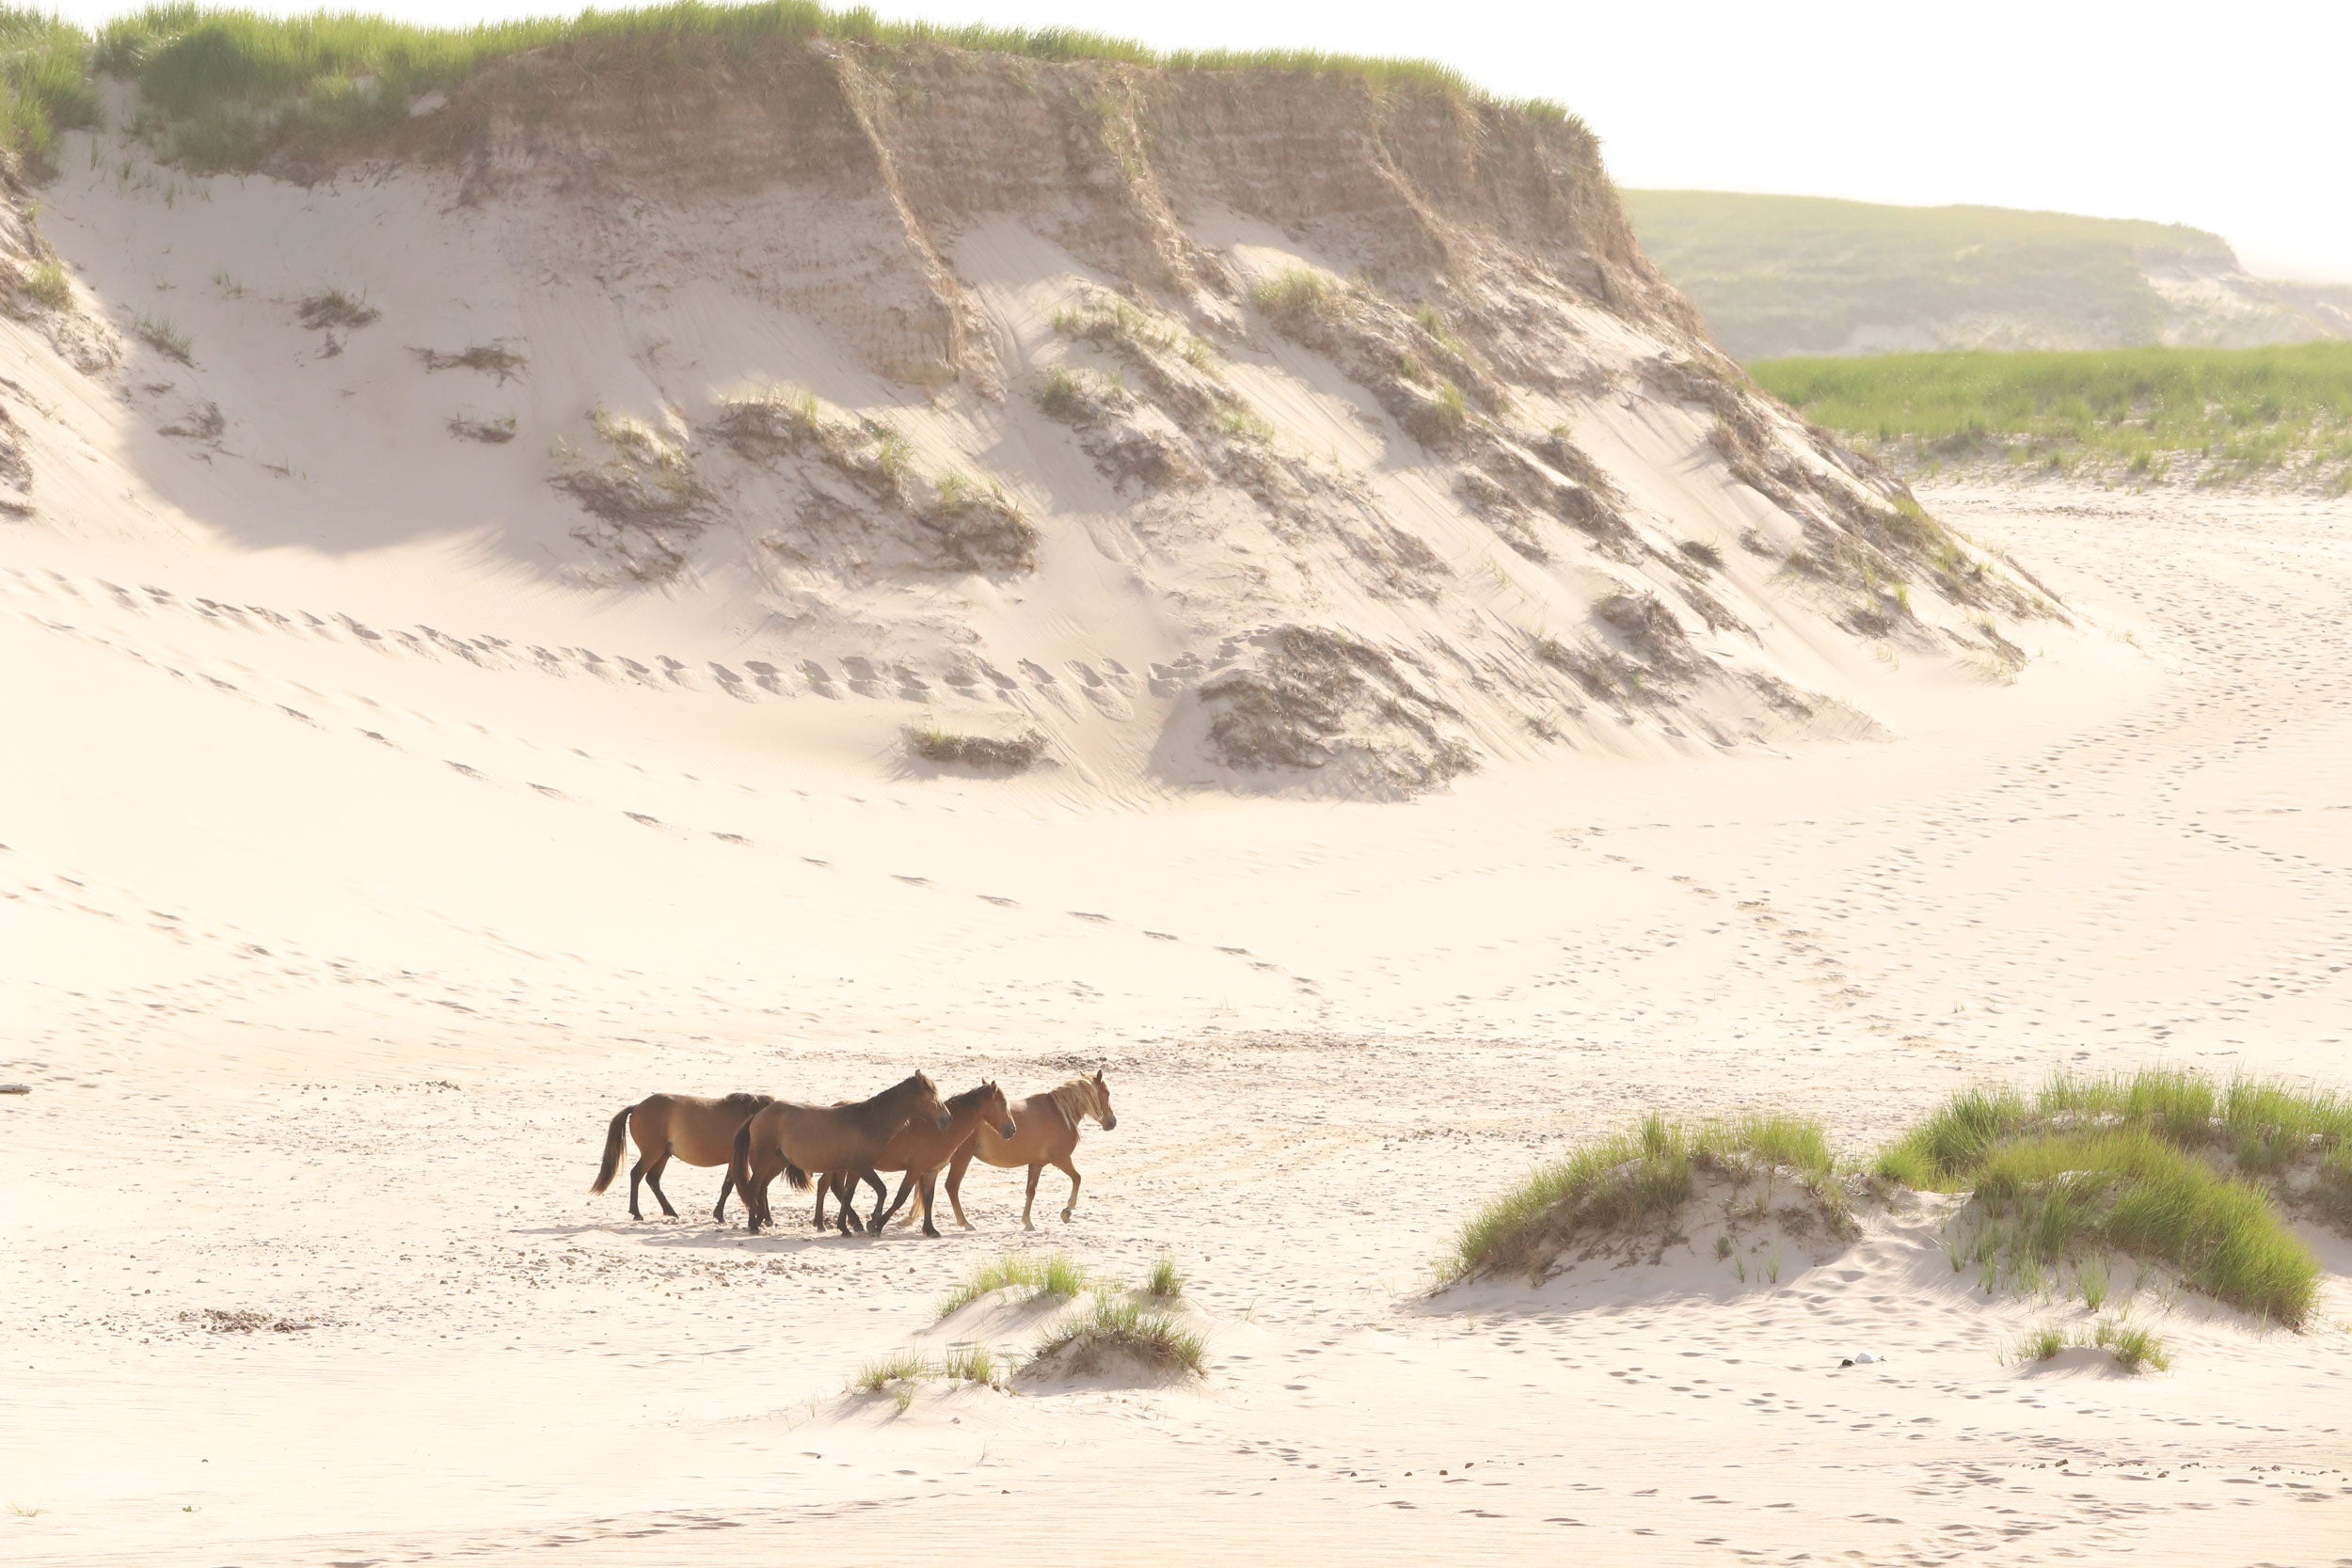 Sable Island’s famous wild horses are at the heart of a conservation controversy